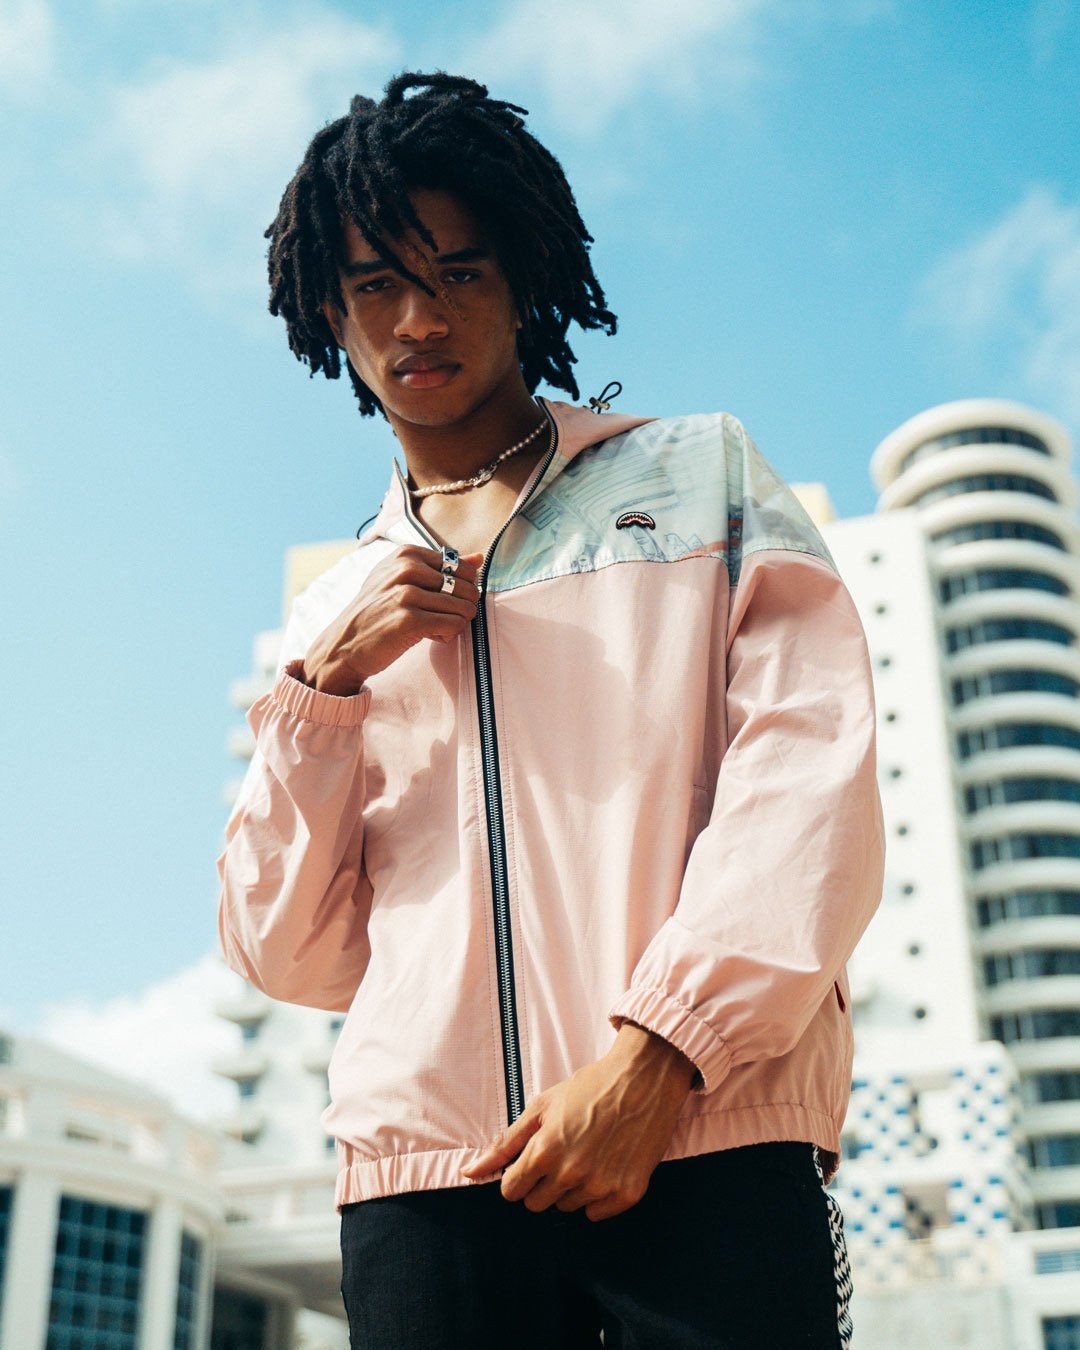 MONEY STACKS WINDBREAKER (PINK) - HIGH QUALITY AND INEXPENSIVE - MONEY STACKS WINDBREAKER (PINK) HIGH QUALITY AND INEXPENSIVE-01-10